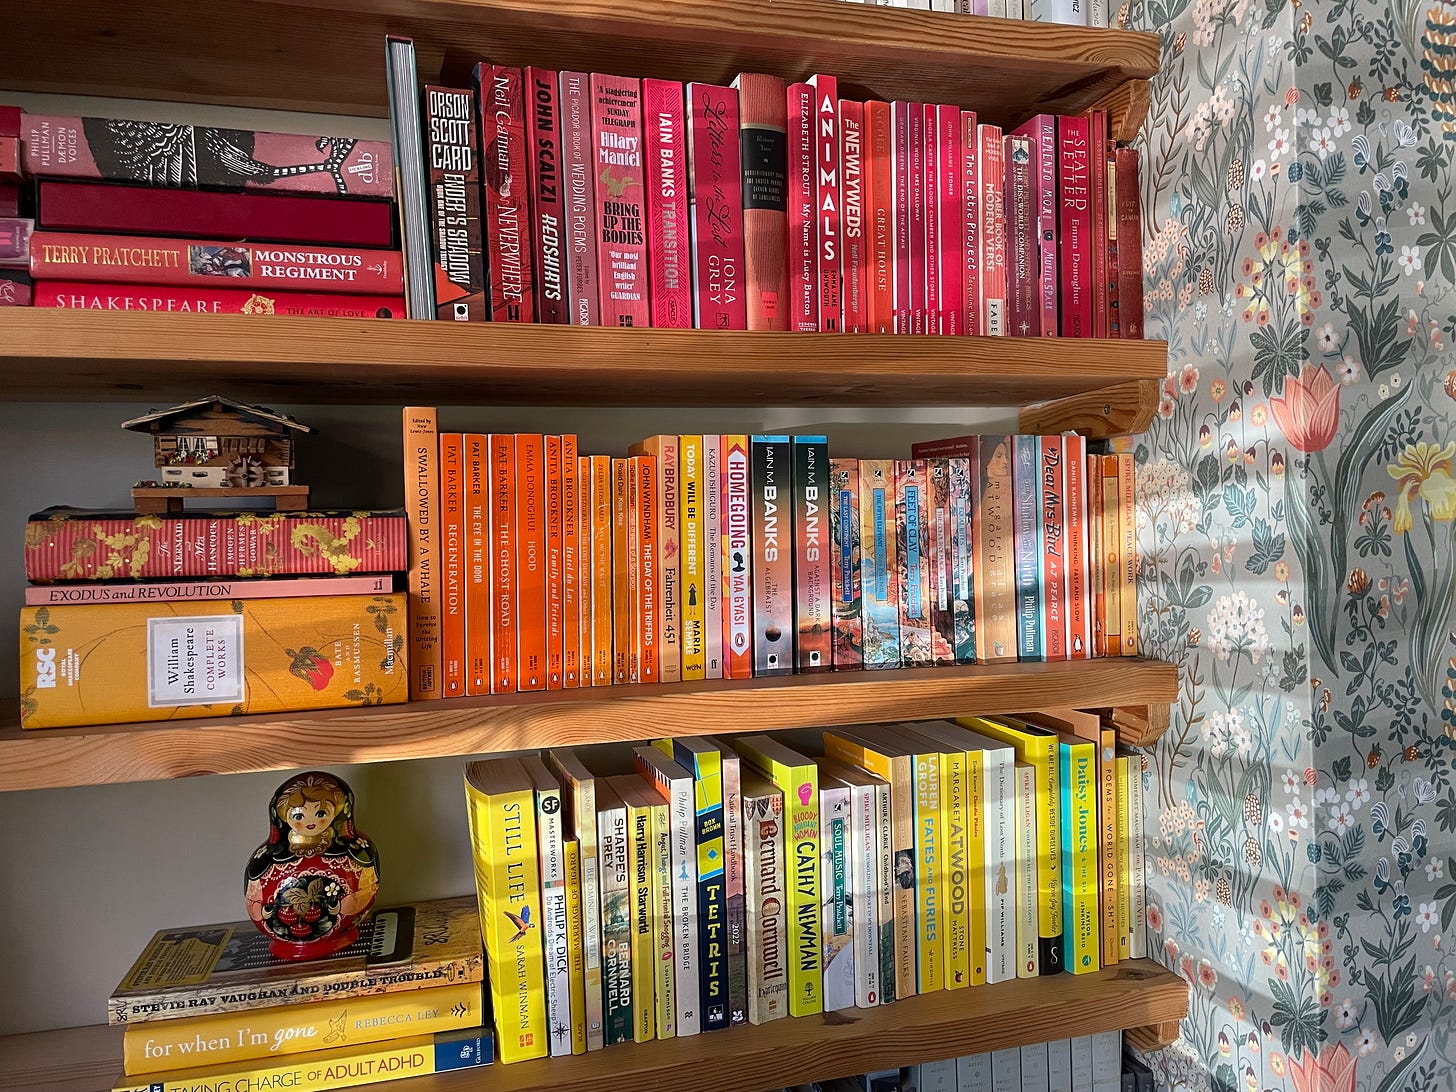 A photo of my bookshelves. Three pine shelves are visible, one with red books, one with orange and one with yellow. You can also see floral wallpaper on the wall, and the light shining in through the slats of the blinds. 